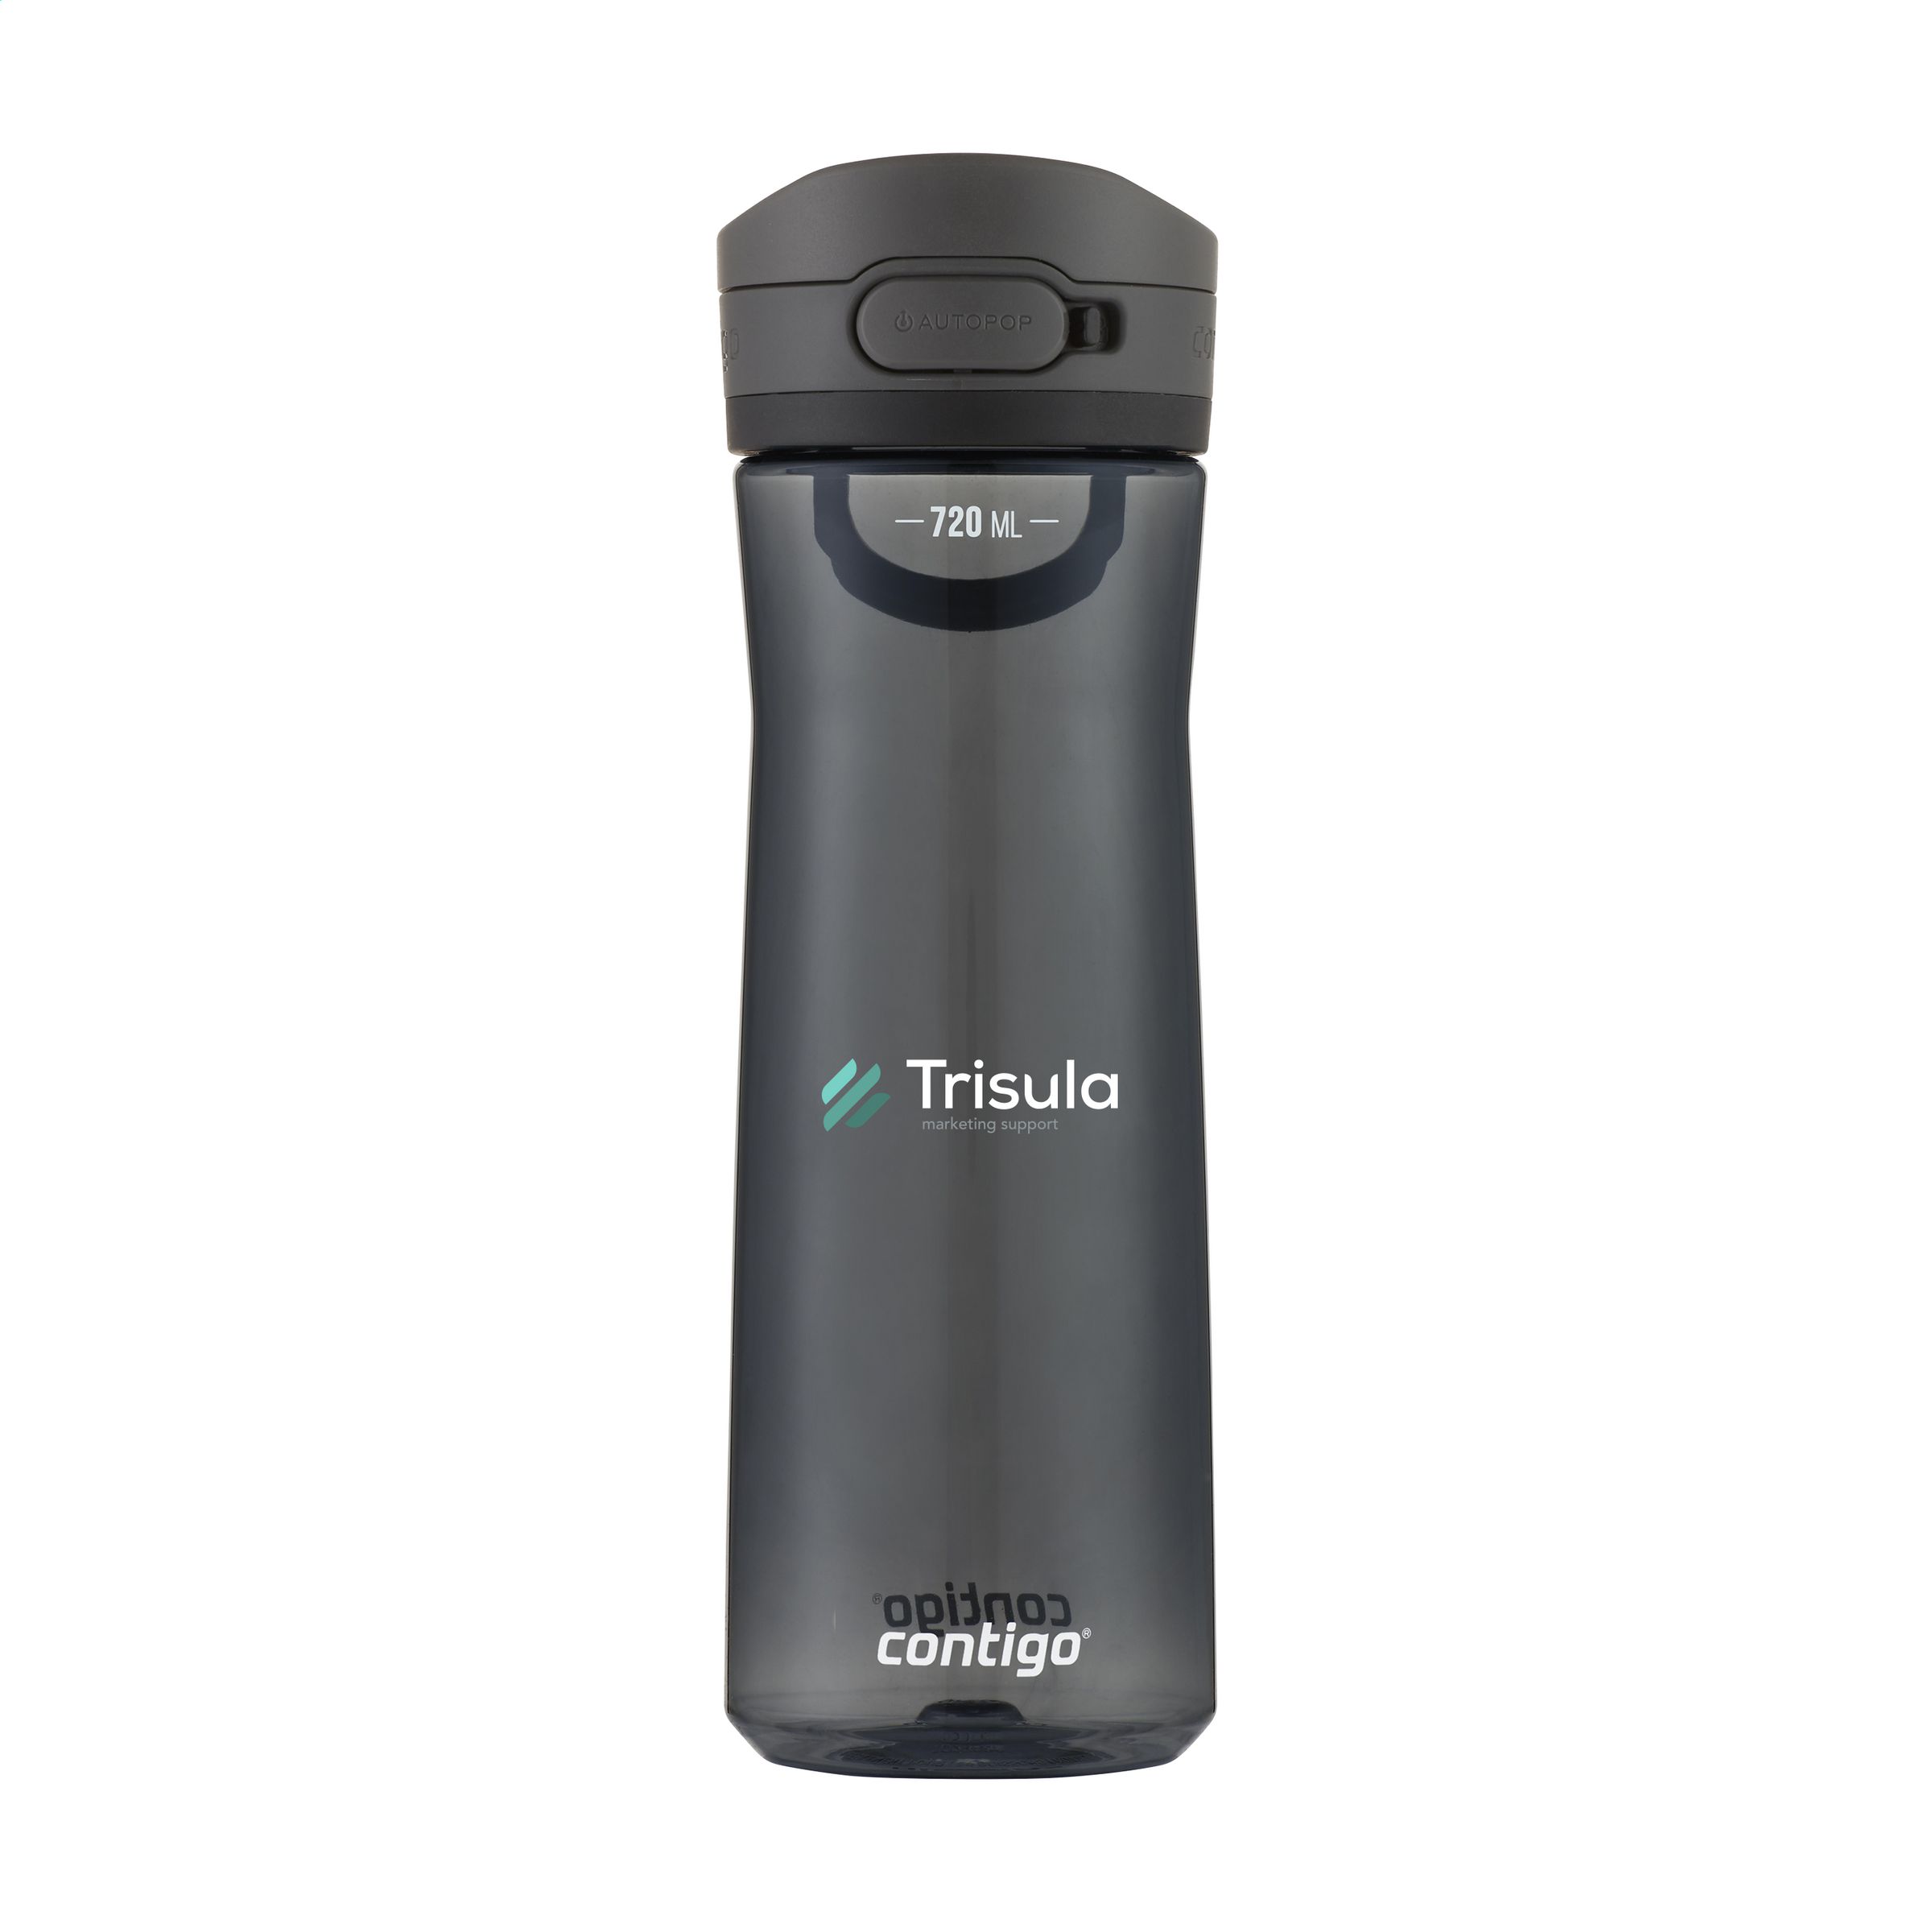 Easy-to-use Water Bottle - Piddlehinton - Redditch